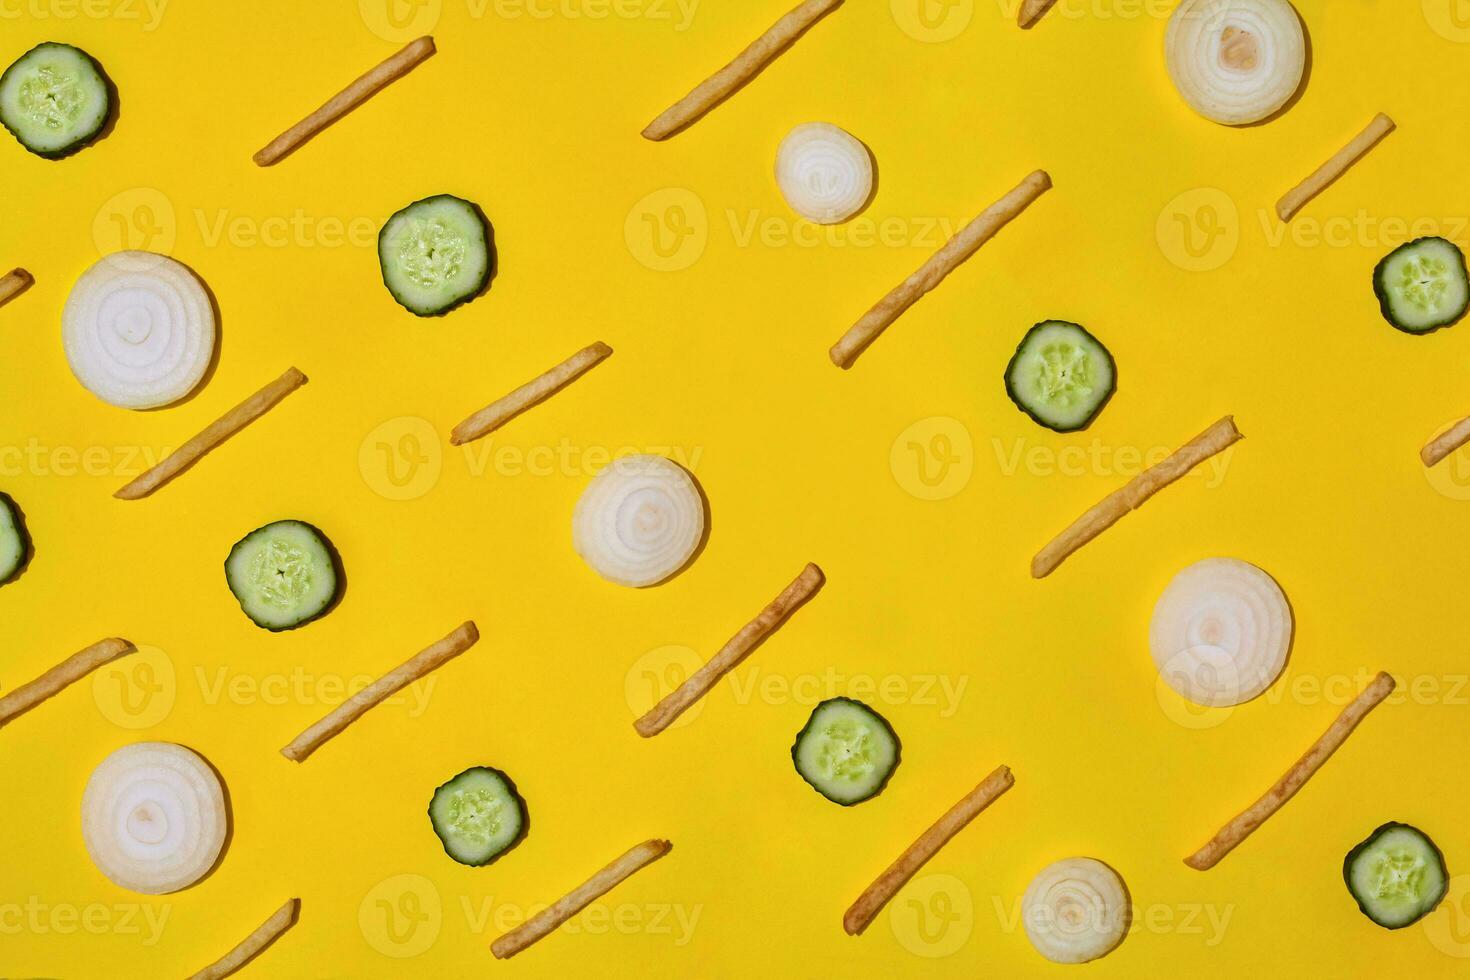 Heap of french fries on yellow background, top view photo